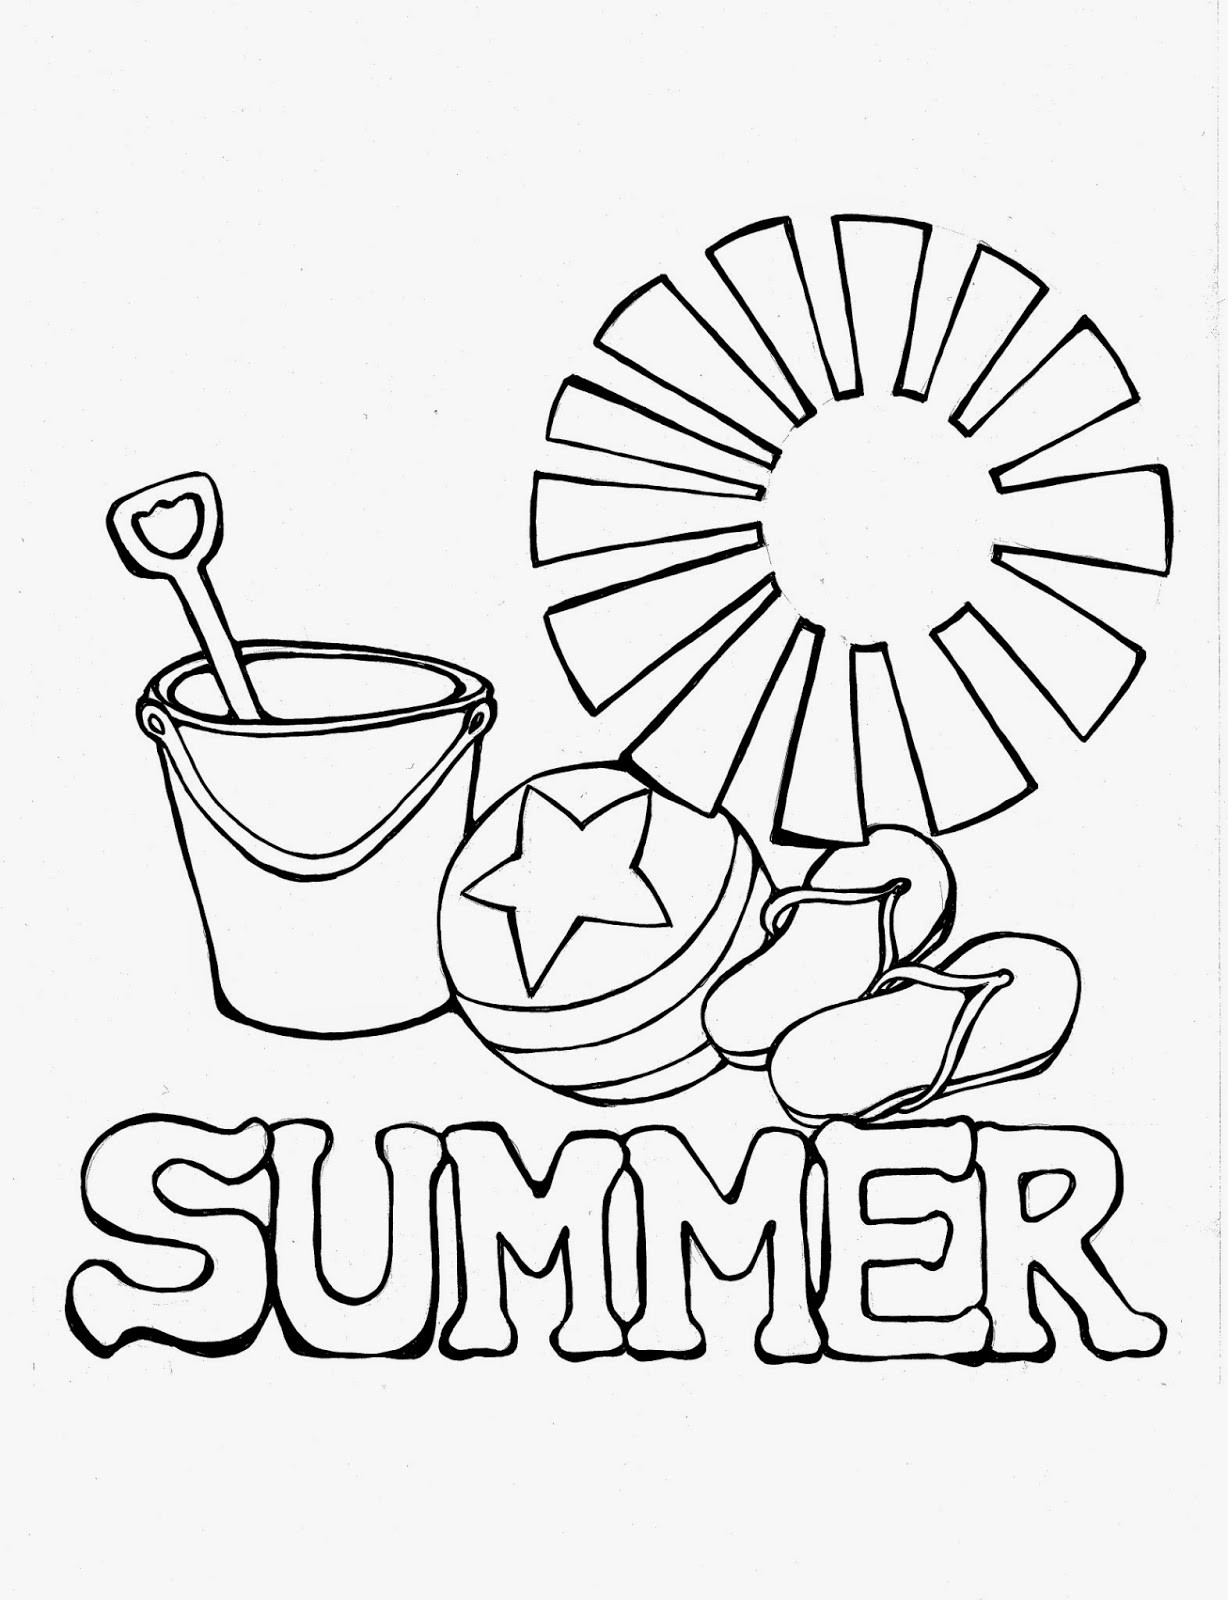 Summer Coloring Sheets For Kids
 